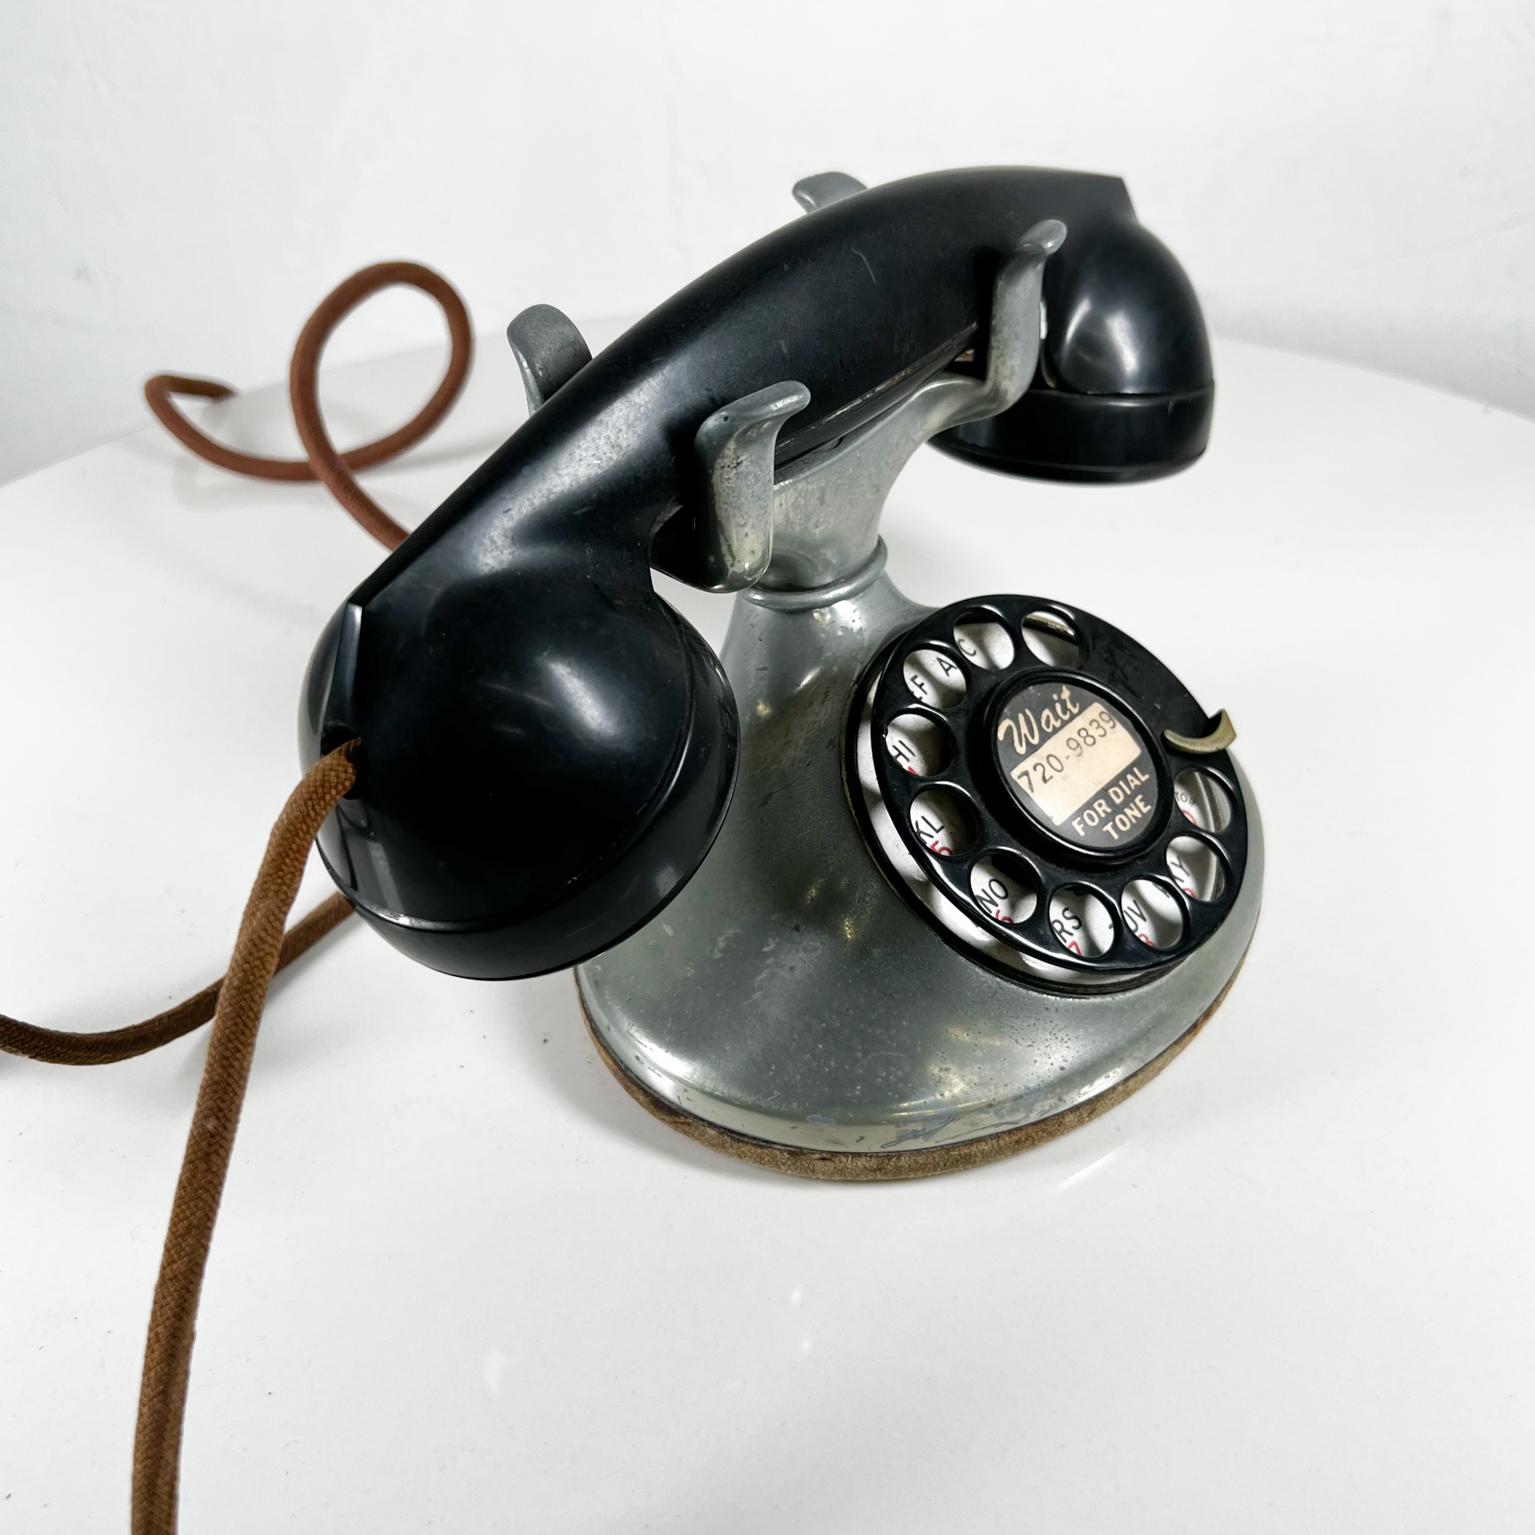 Art Deco 1940s Antique Silver Telephone Western Electric Bell System Rotary Dial